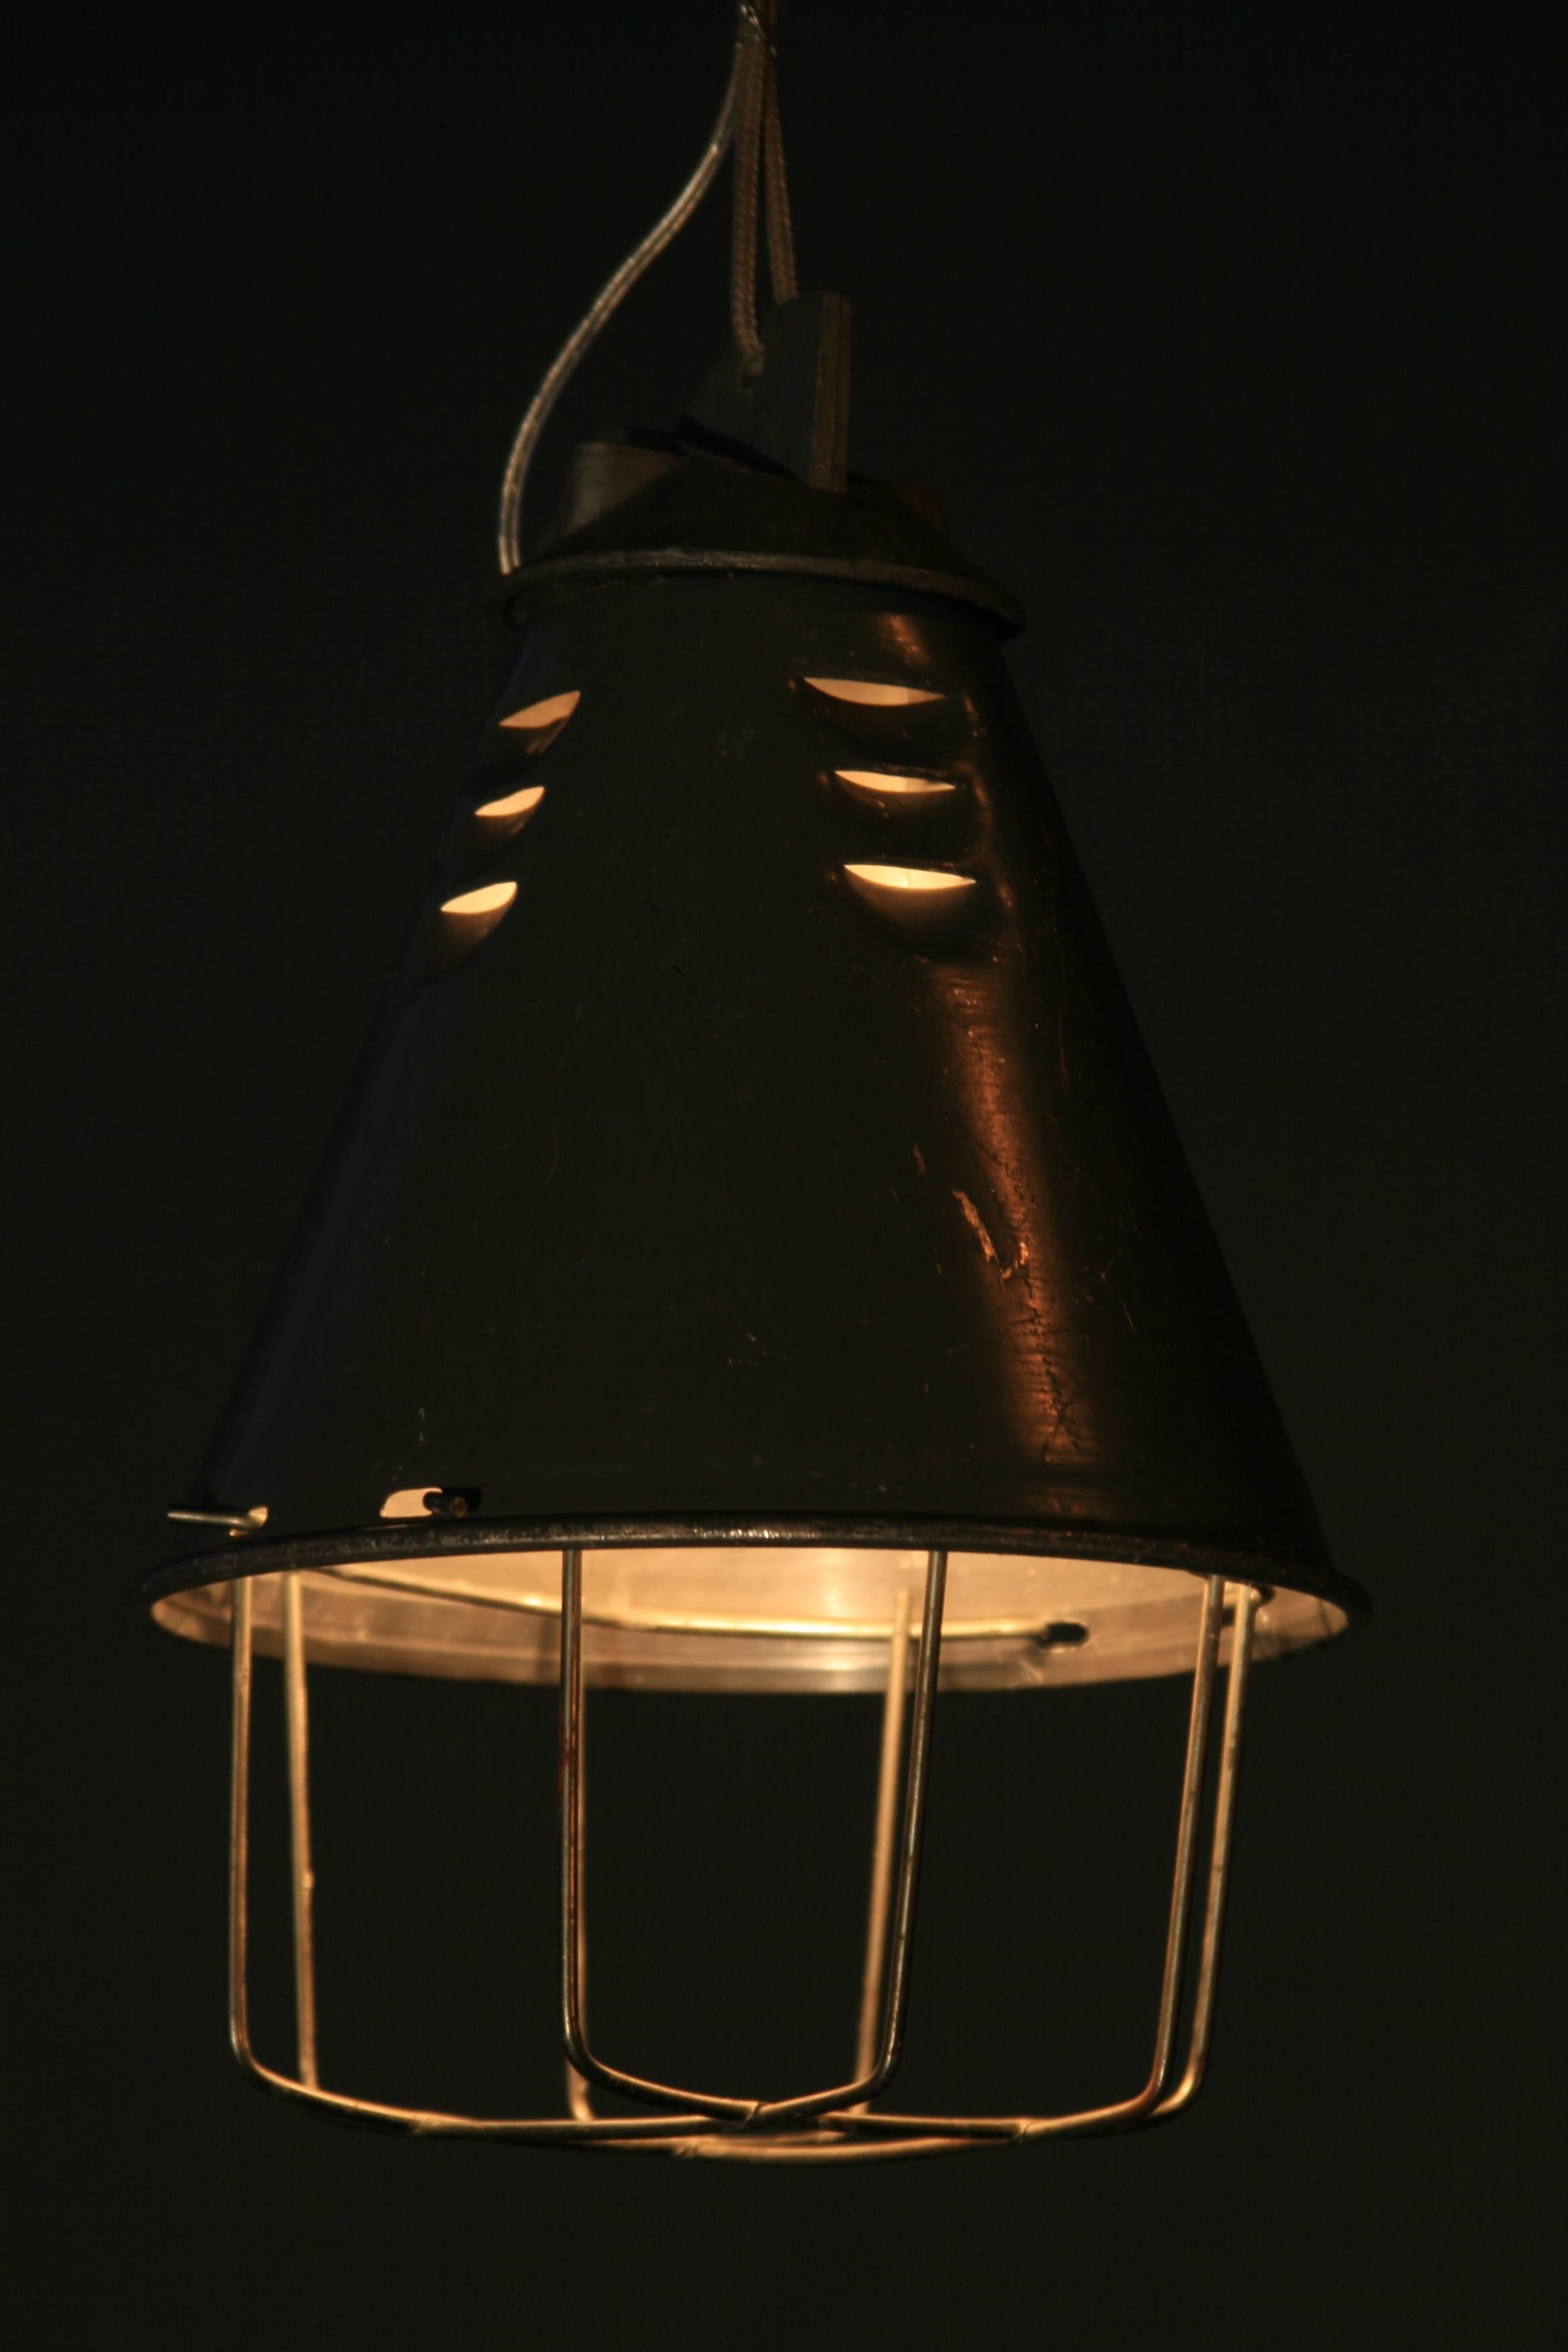 Primary use:
The offered lamp was designed for heating livestock during their development. The light source was a bulb – a 250 W heat radiator.
Country of origin: Poland
Production years: 1970s

Construction:
A conical aluminium diffuser